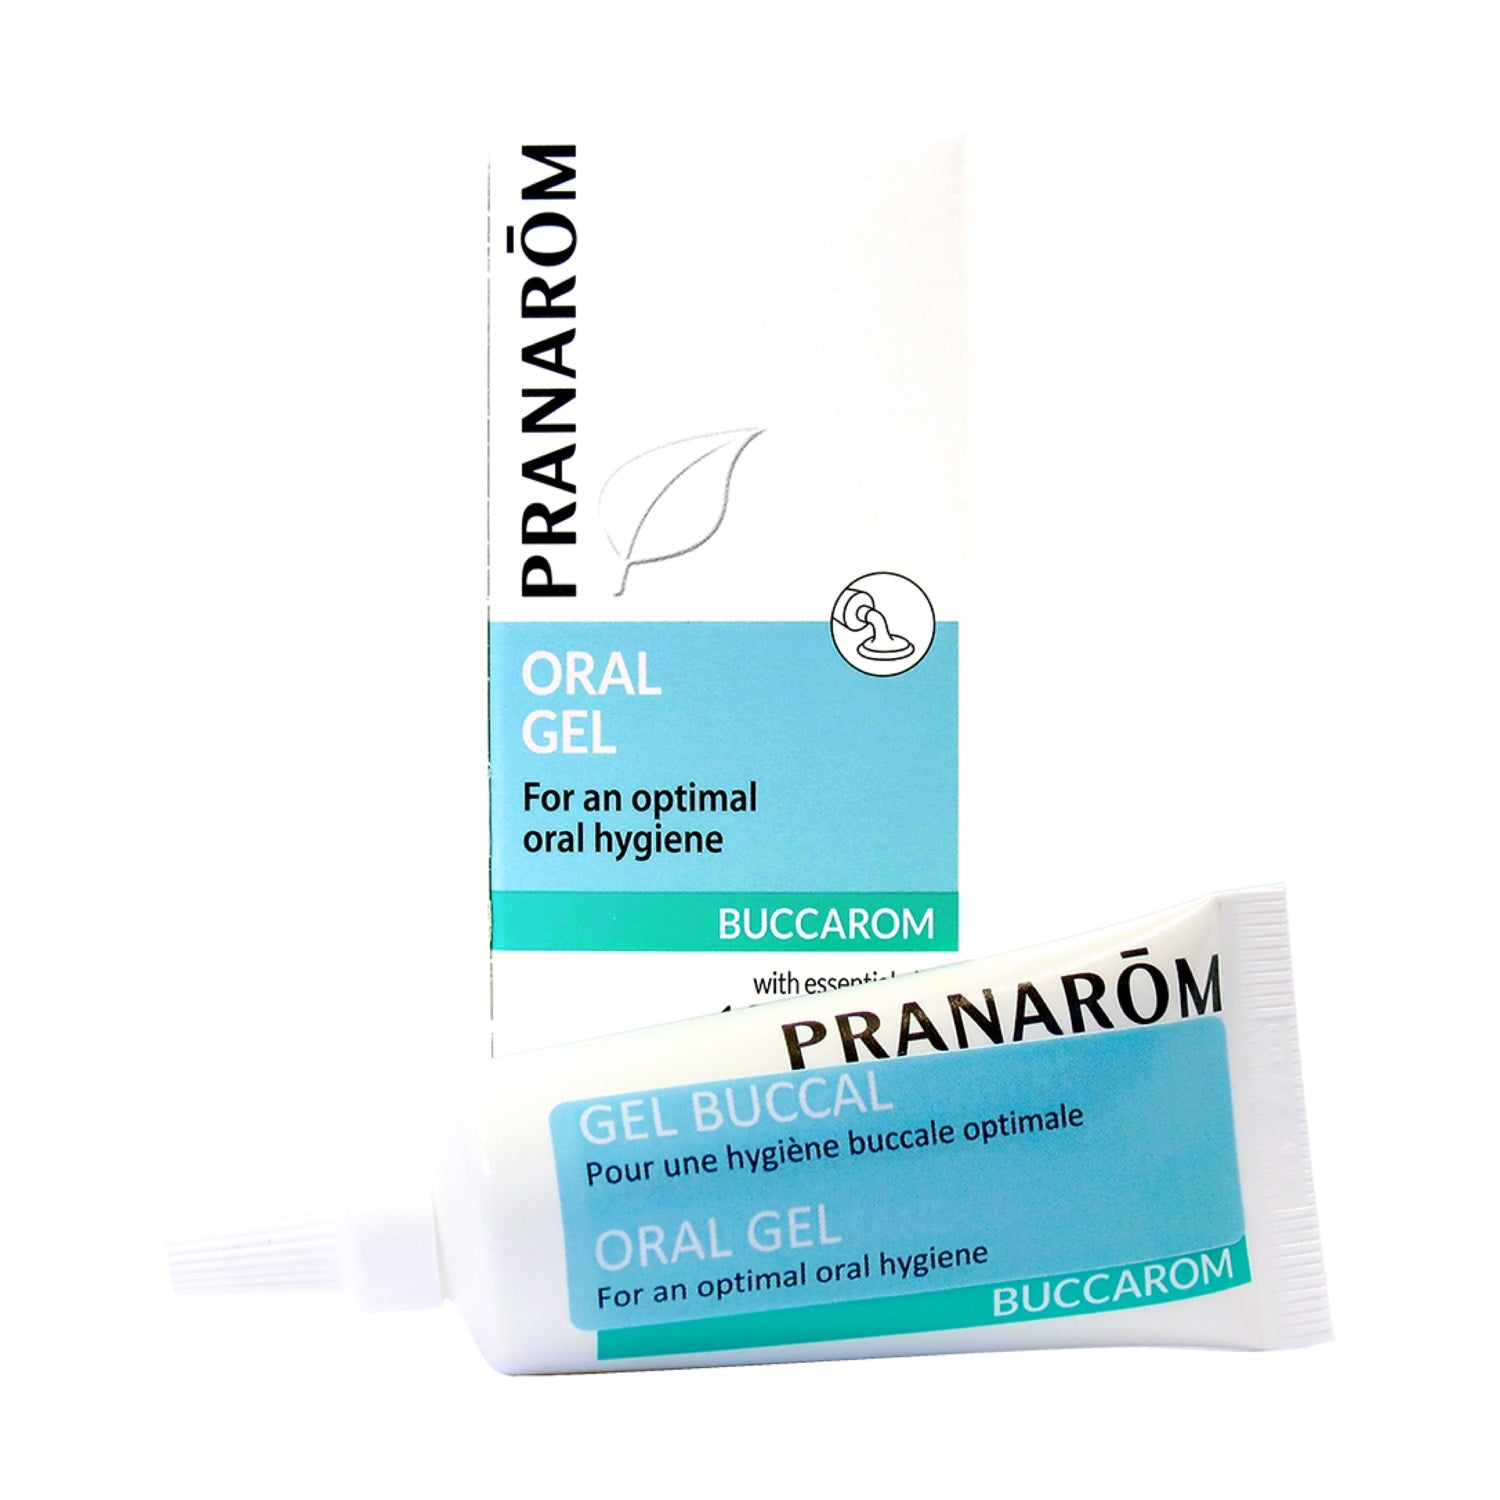 Buccarom Oral Gel 100% pure and natural essential oils 15 ml - iwellnessbox